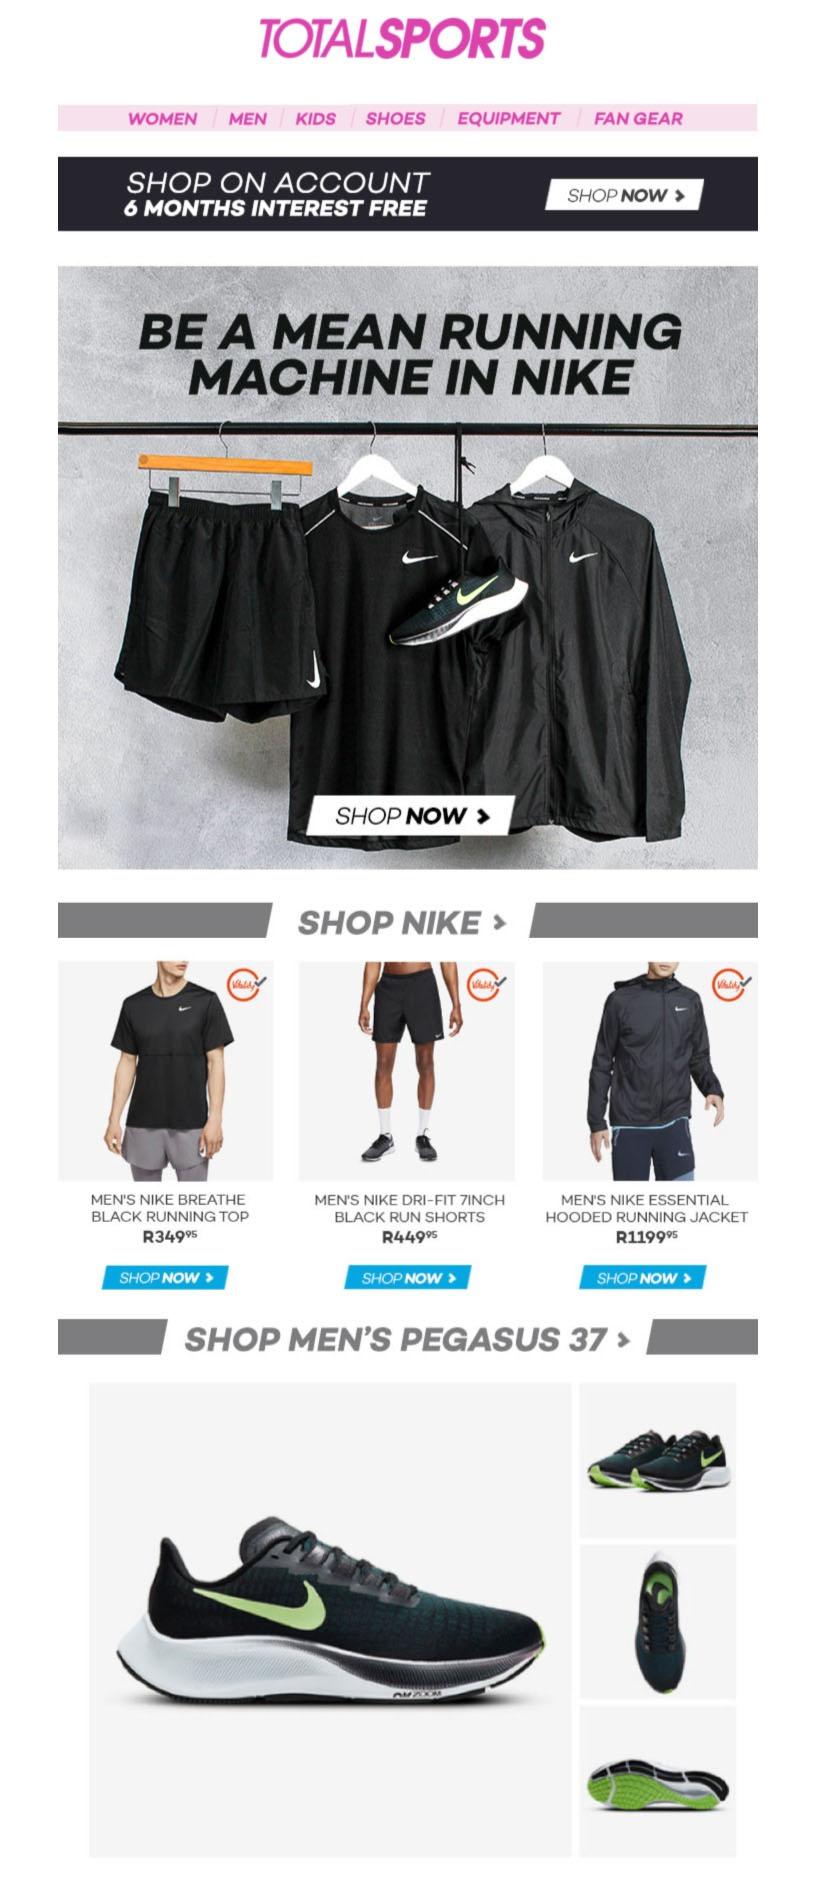 total sports nike shoes prices